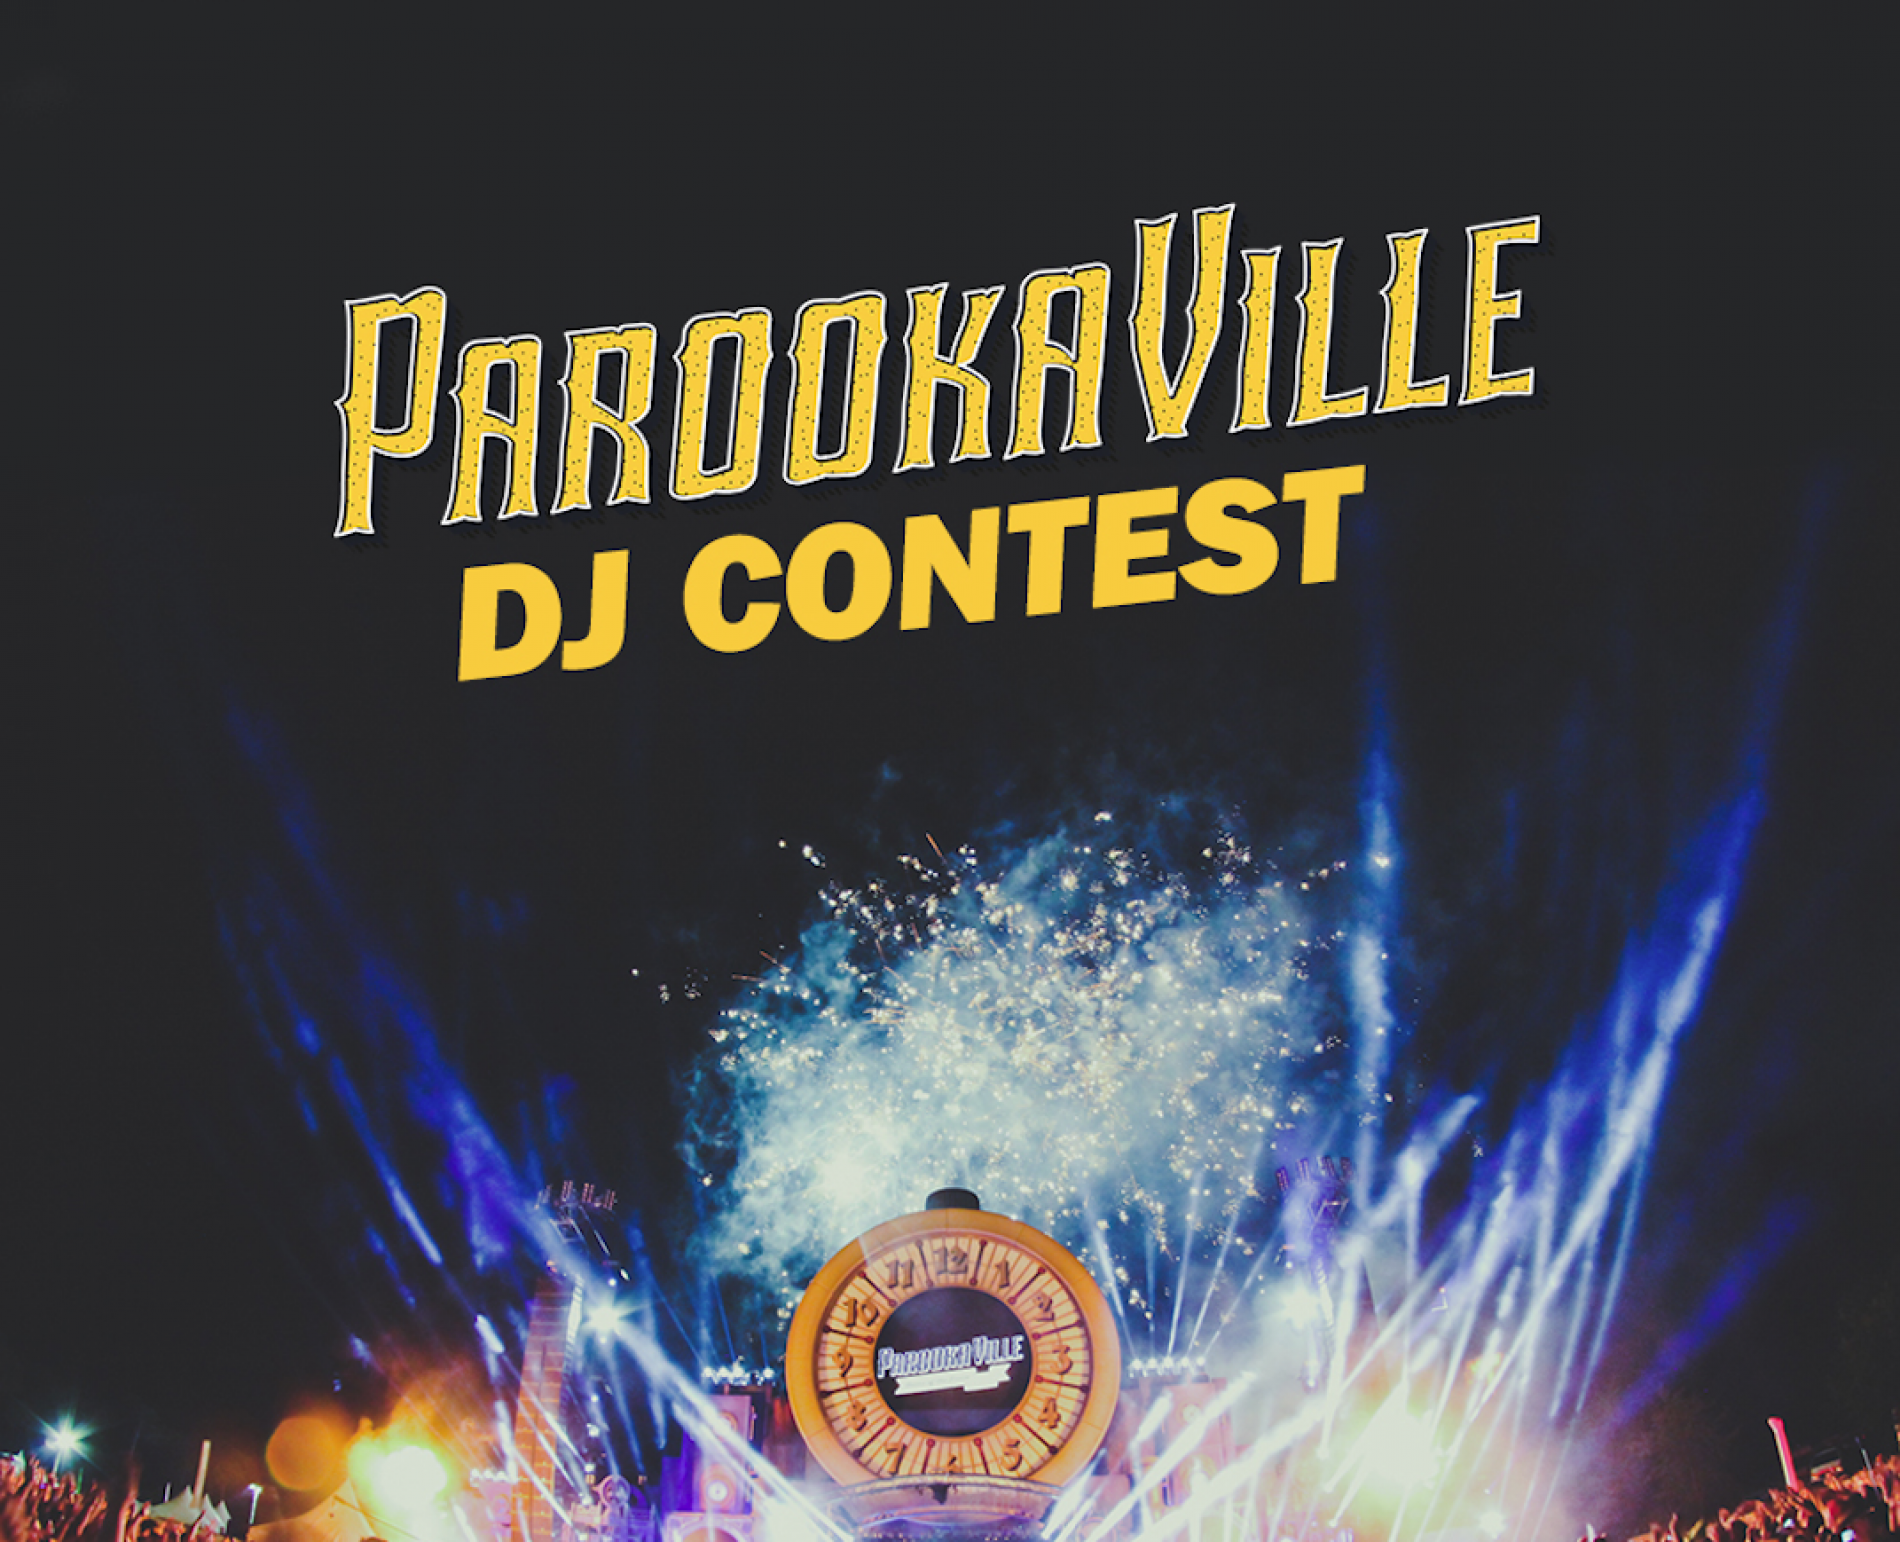 Win DJ set at Parookaville, festival tickets, Pioneer package and more!